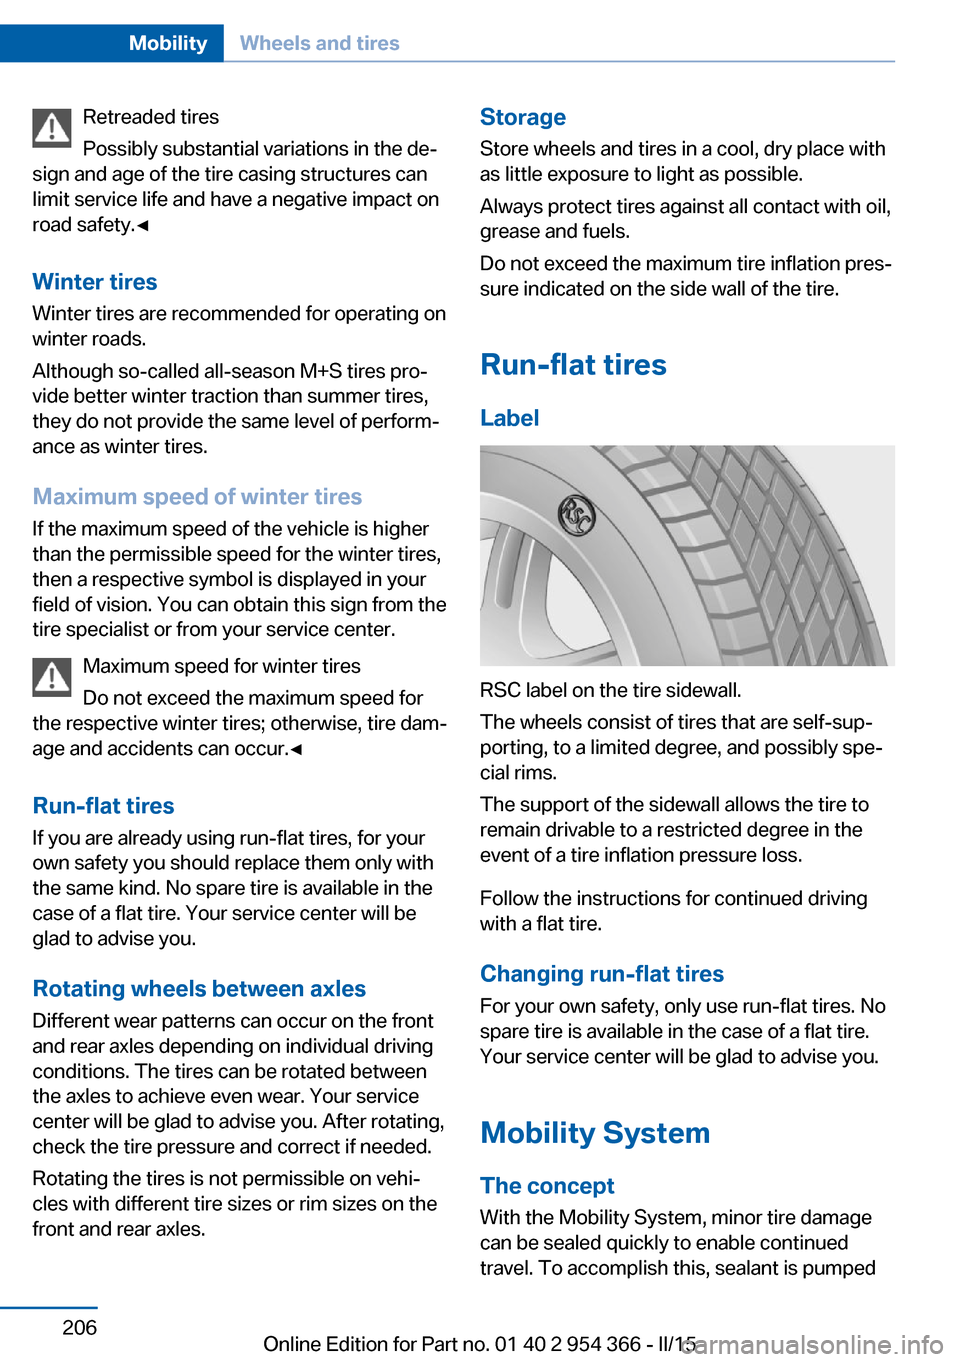 BMW ACTIVE HYBRID 5 2015 F10H Owners Manual Retreaded tires
Possibly substantial variations in the de‐
sign and age of the tire casing structures can
limit service life and have a negative impact on
road safety.◀
Winter tires
Winter tires a